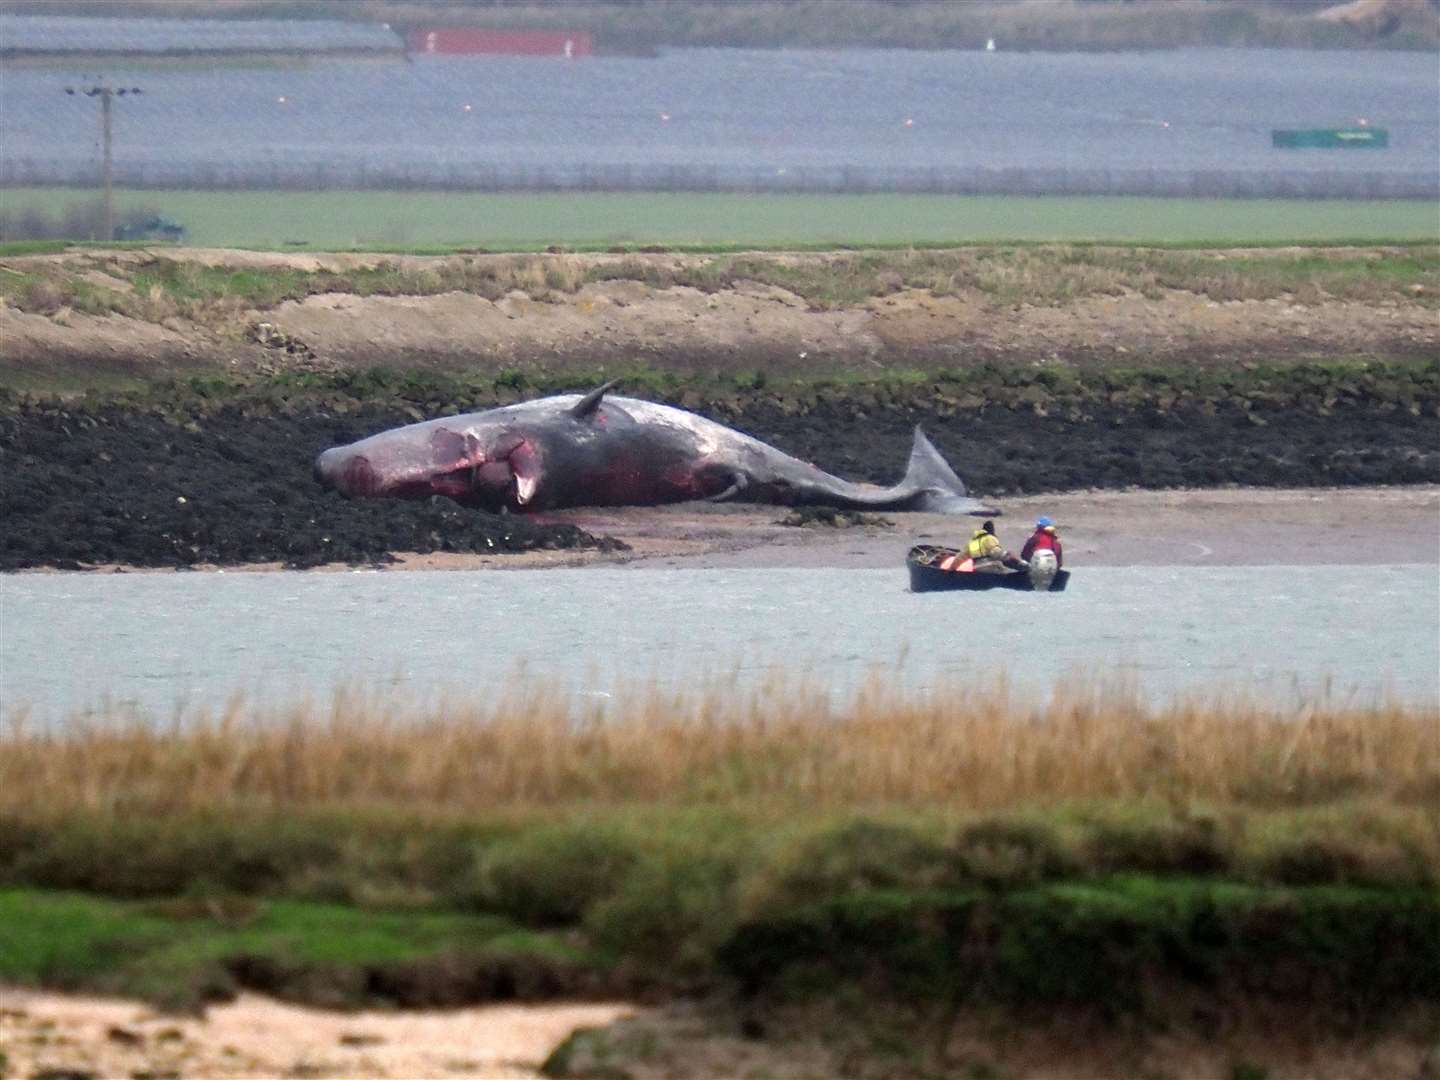 The whale carcass was found beached on a bank off the Sheppey shoreline, near Fowley Island in The Swale, and towed to Peel Ports where it will undergo examination. Picture: James Bell